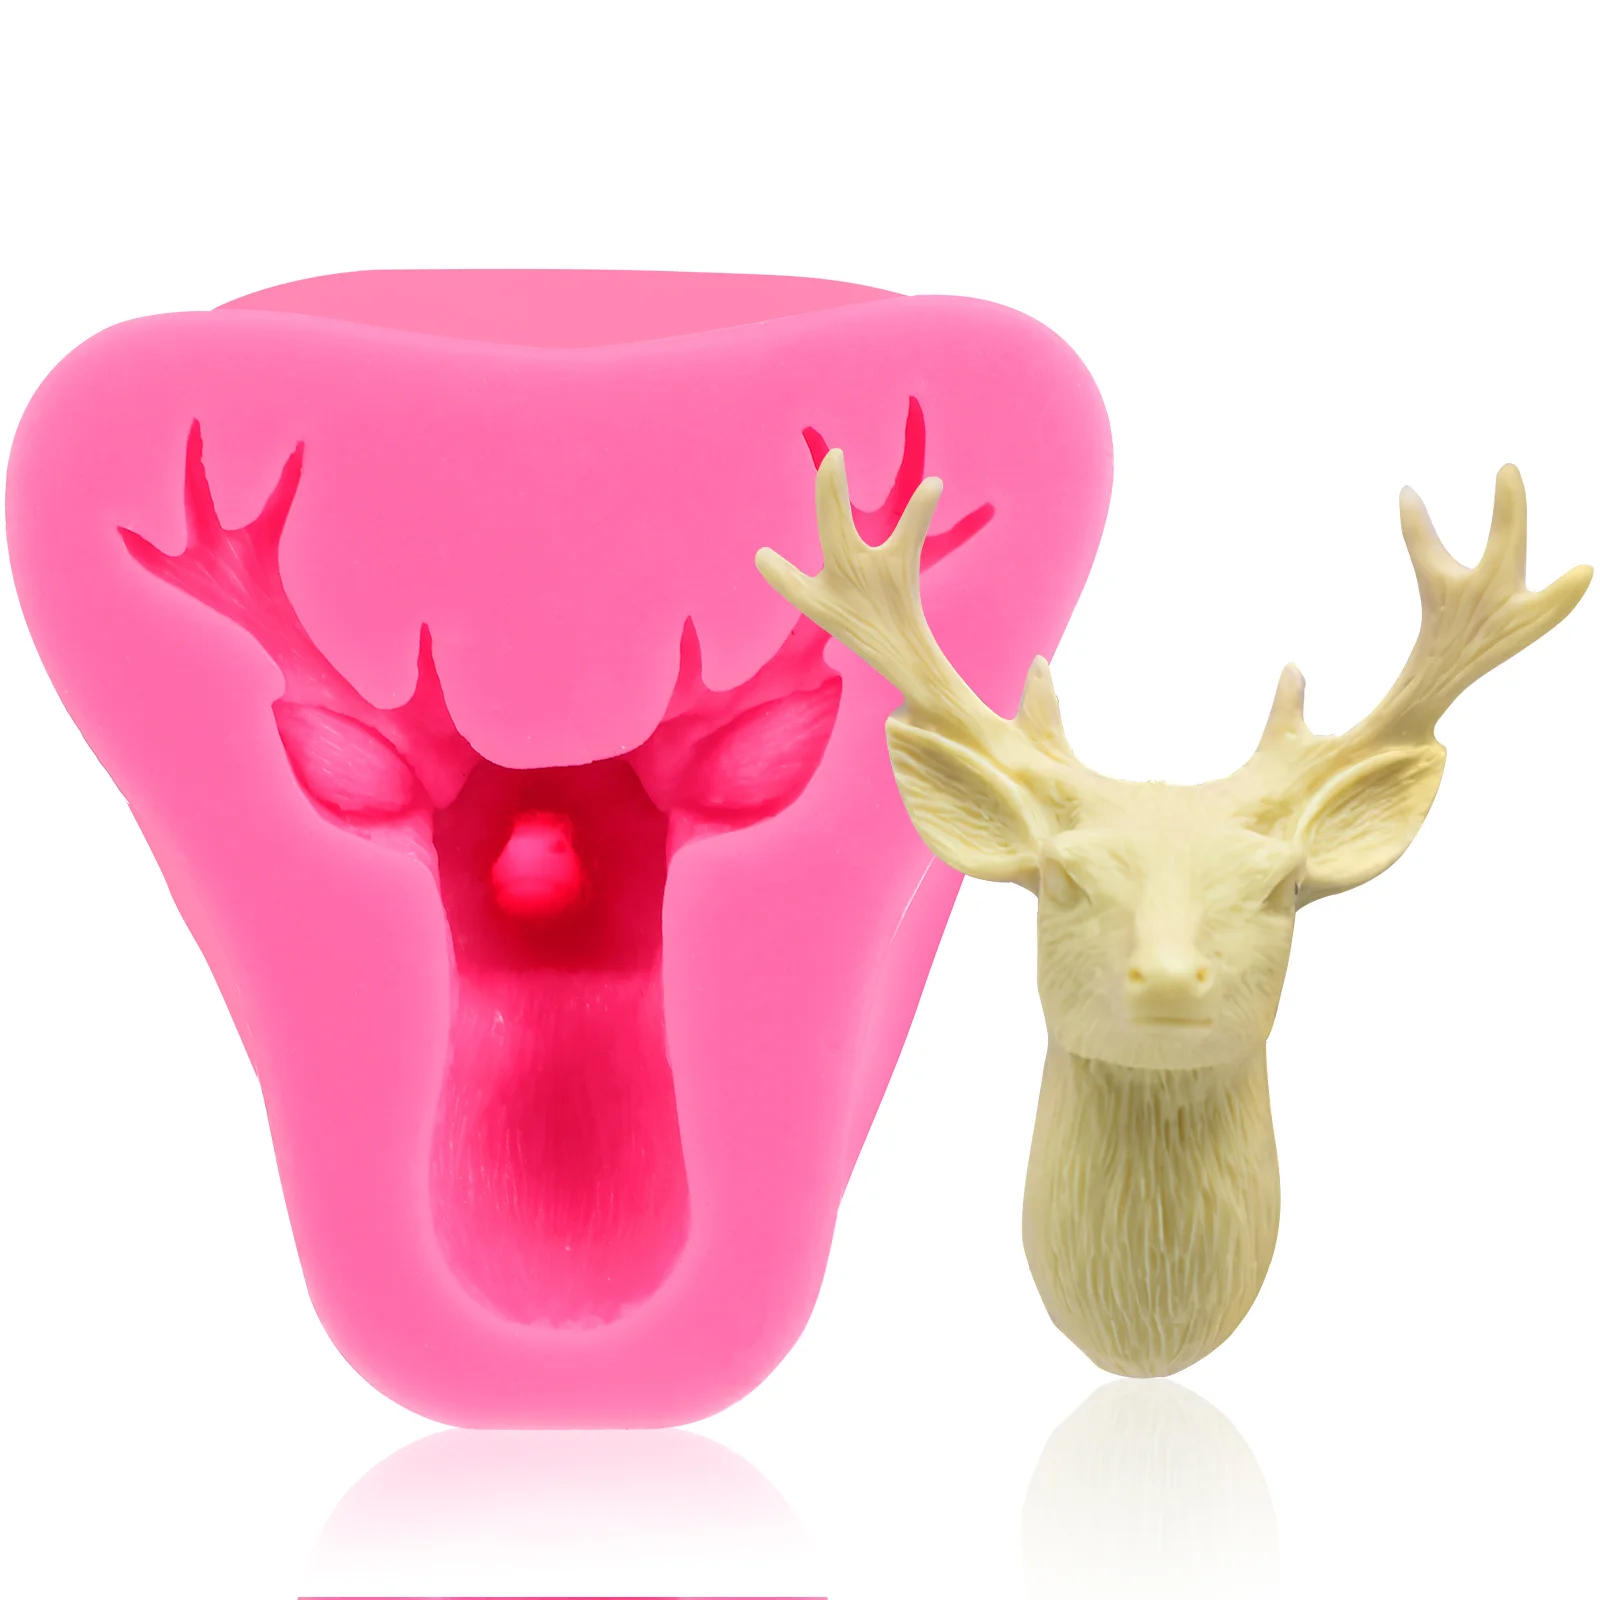 

3D Christmas Deer Silicone Elk Head Cake Molds Soap Chocolate Candy Fondant Mold Kitchen Baking Tool Random Color Cookie Angel